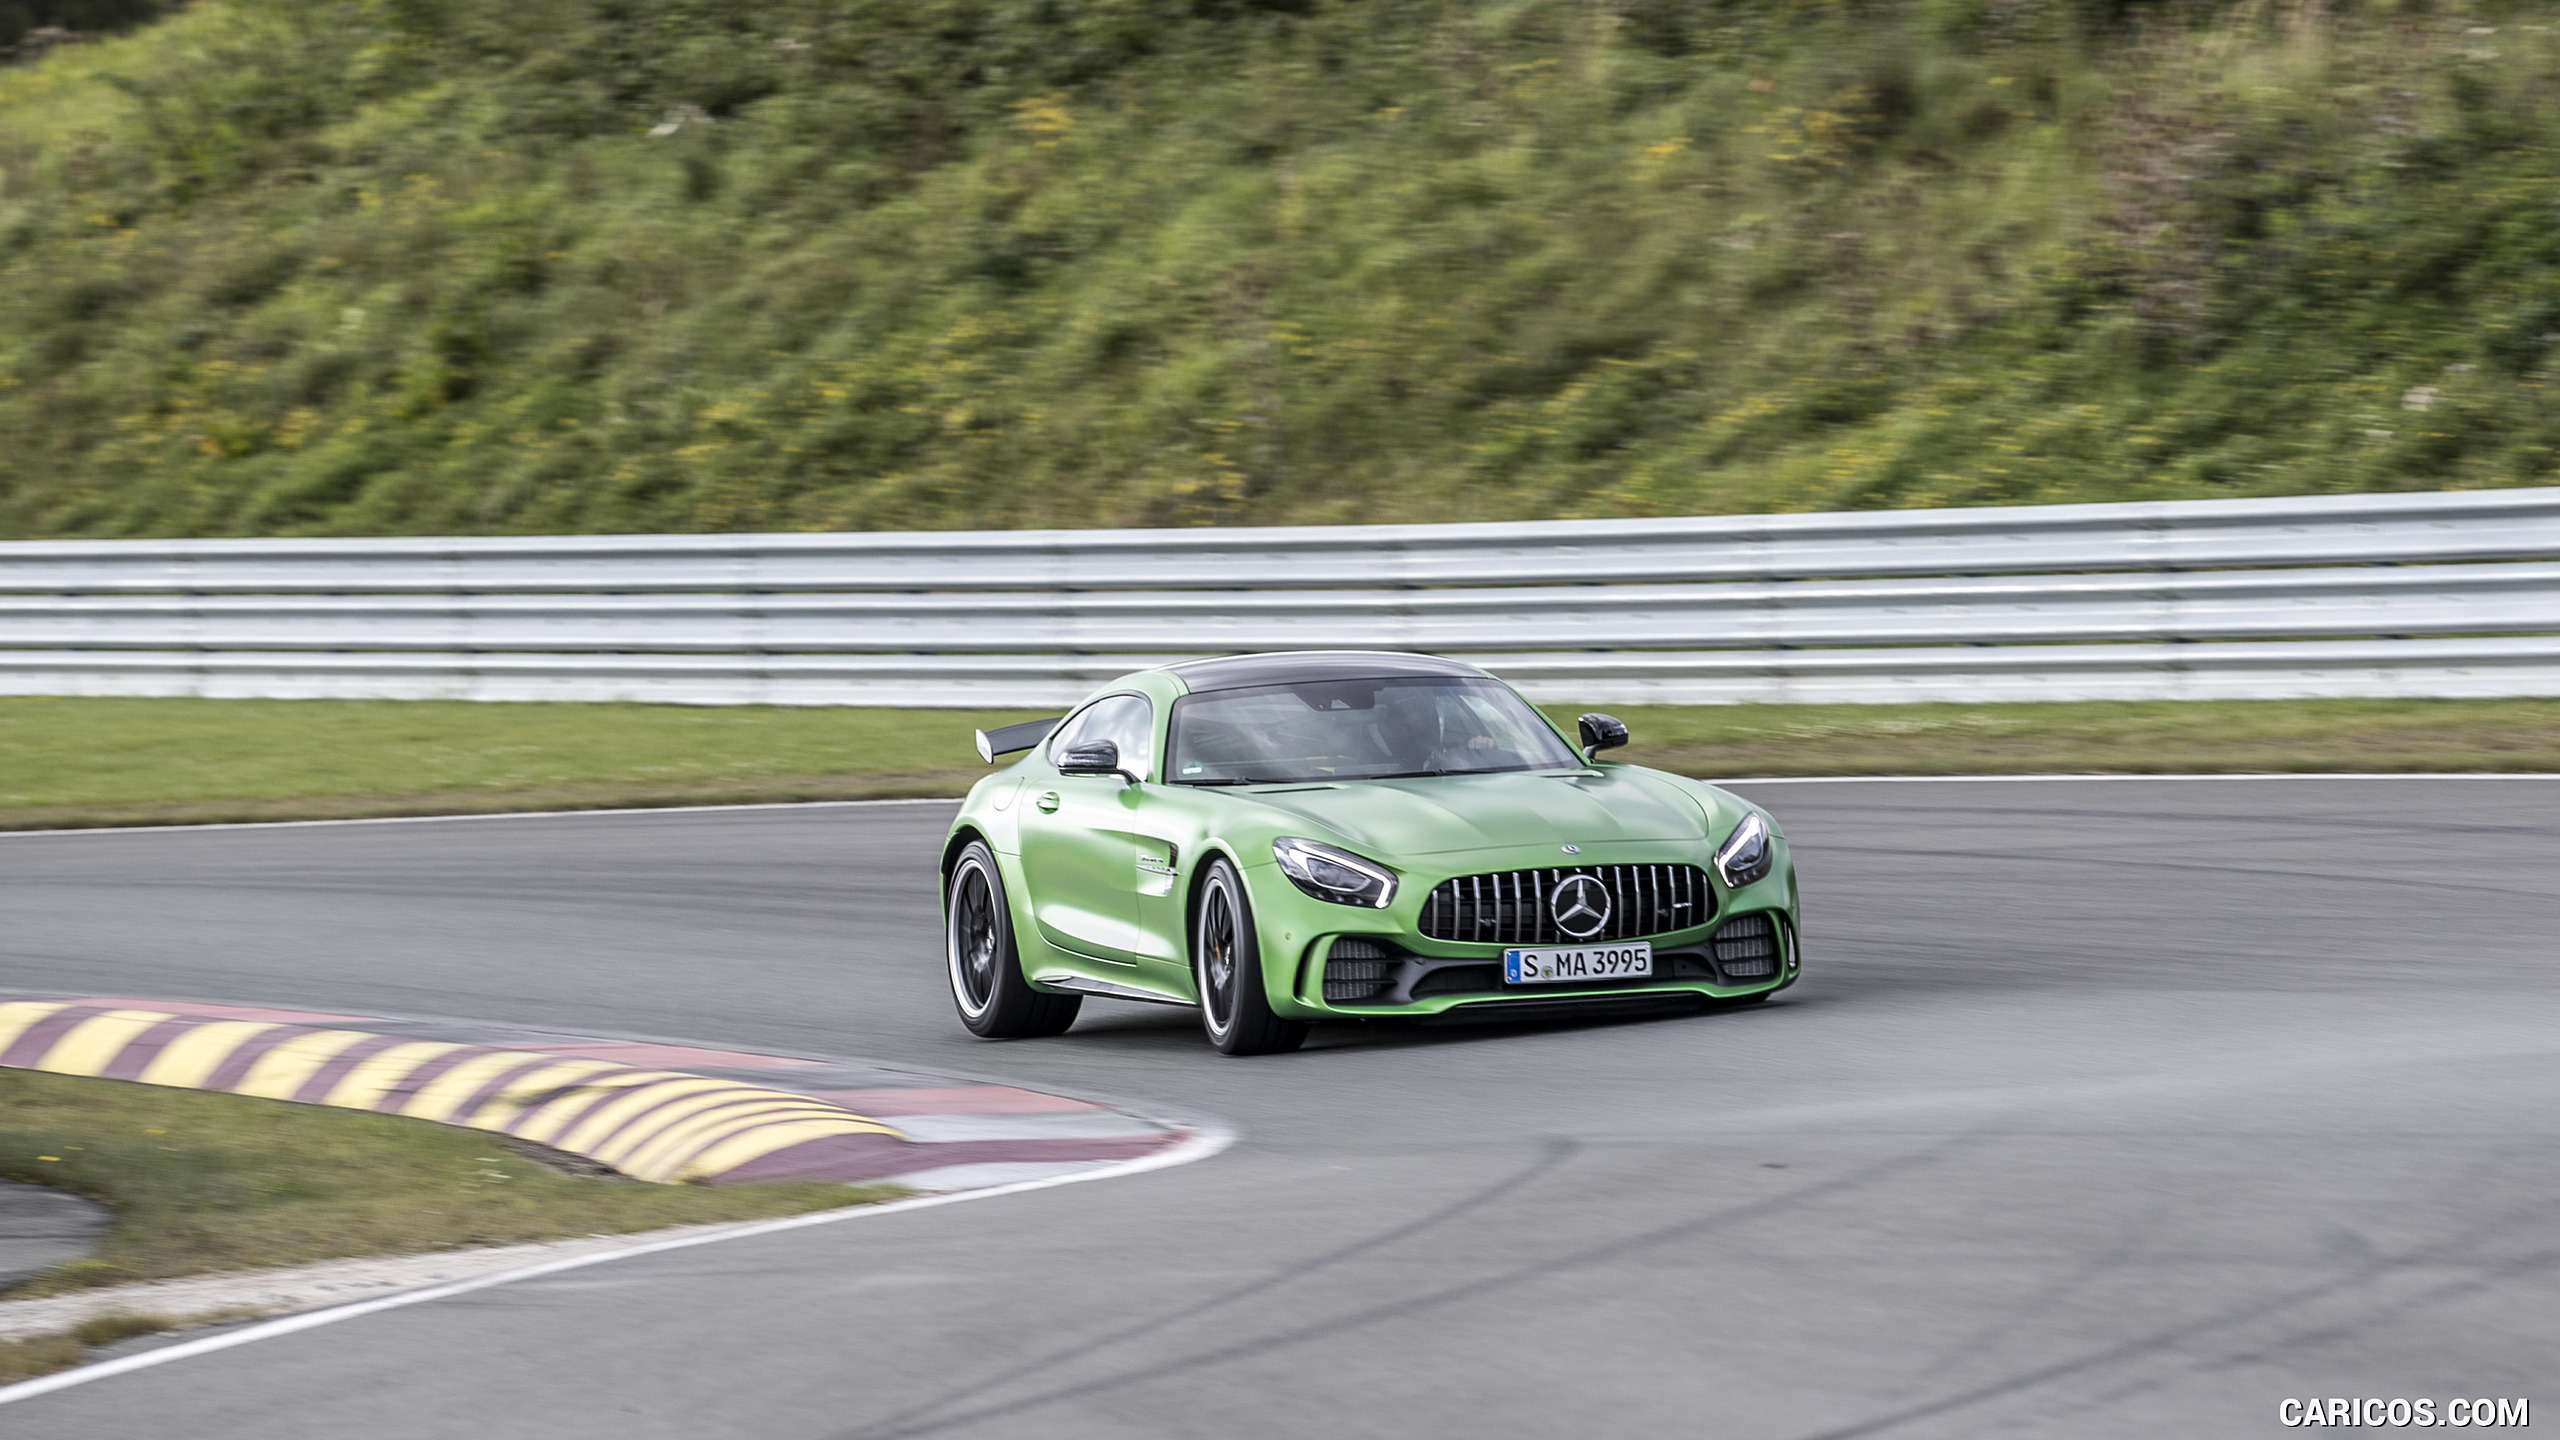 2017 Mercedes-AMG GT R Coupe - Front, #154 of 182